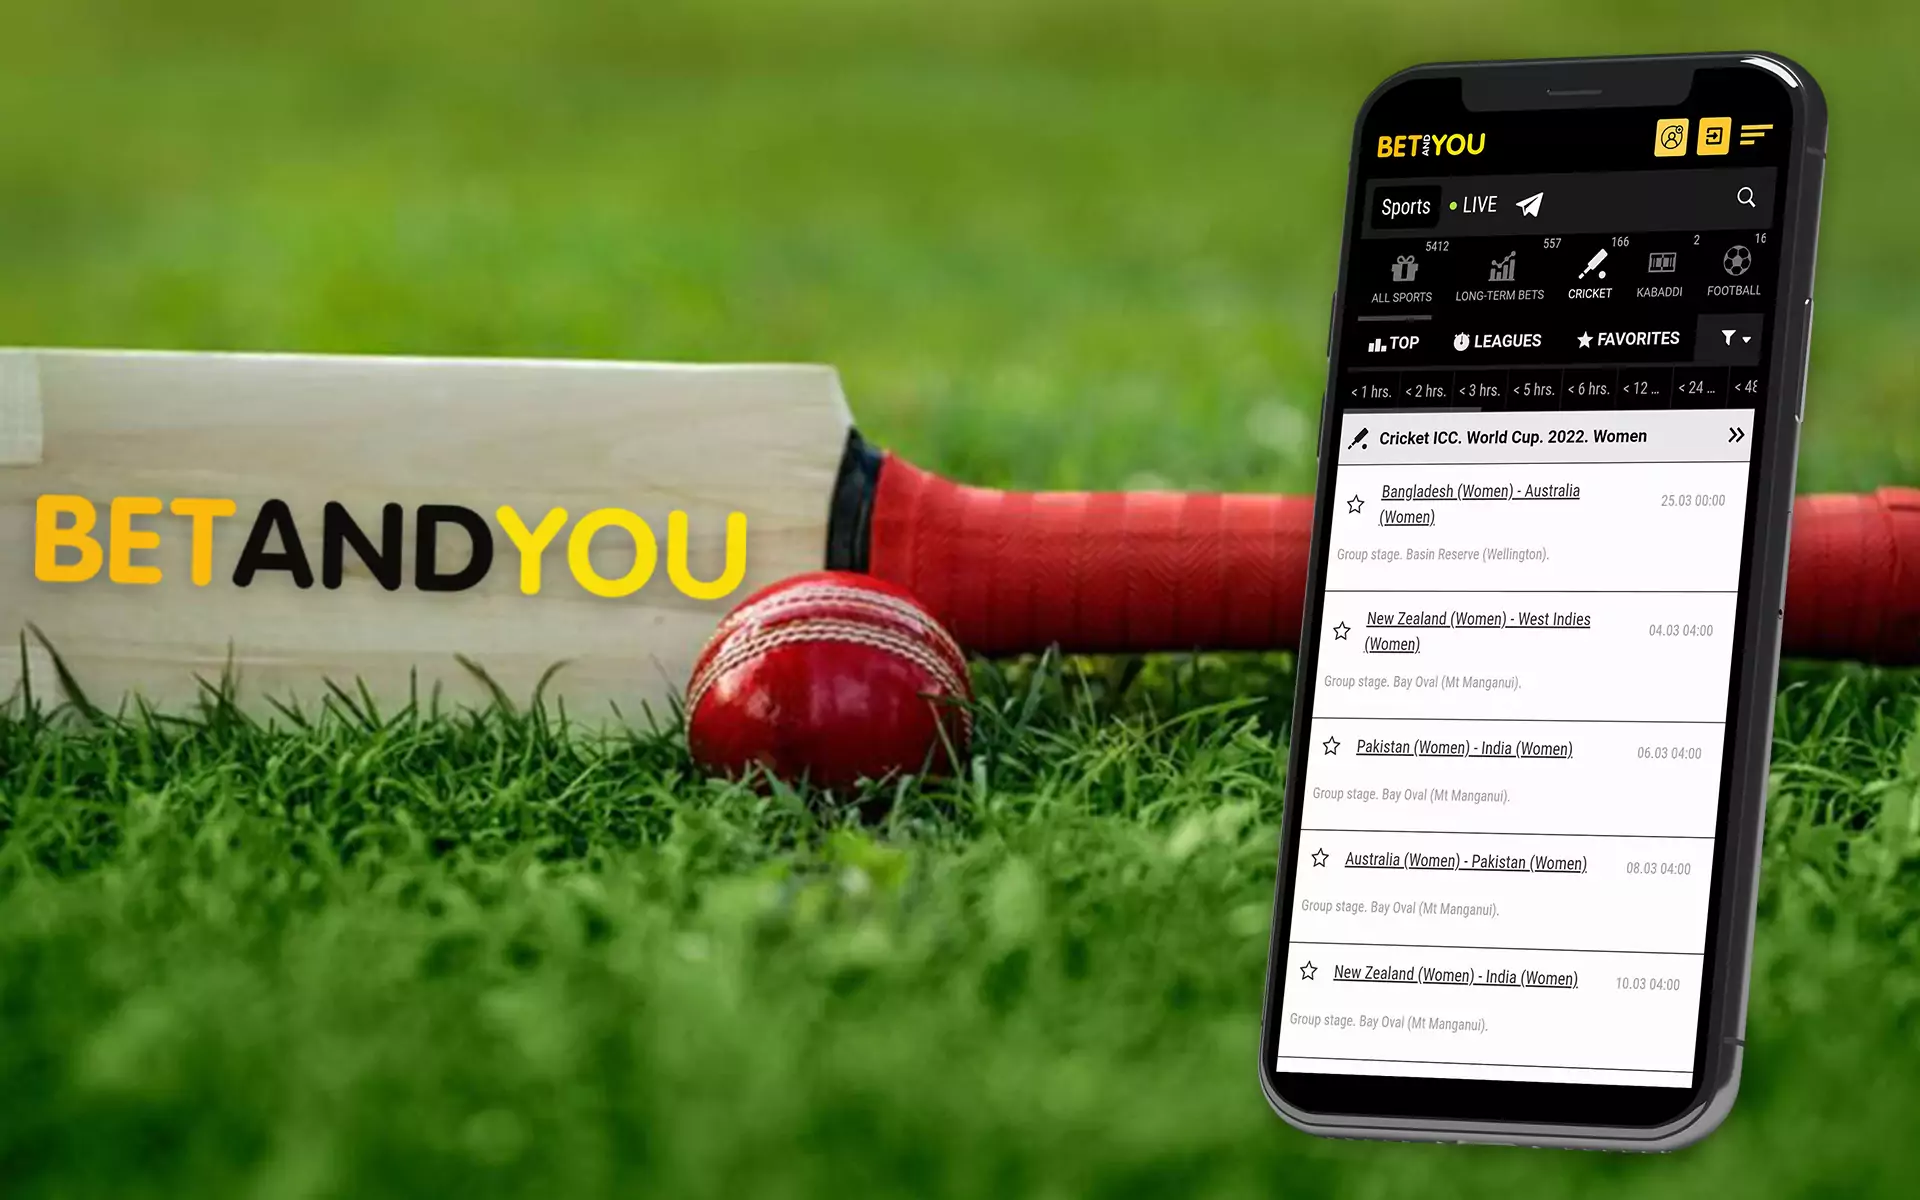 The Betandyou app supports betting on popular cricket competitions.